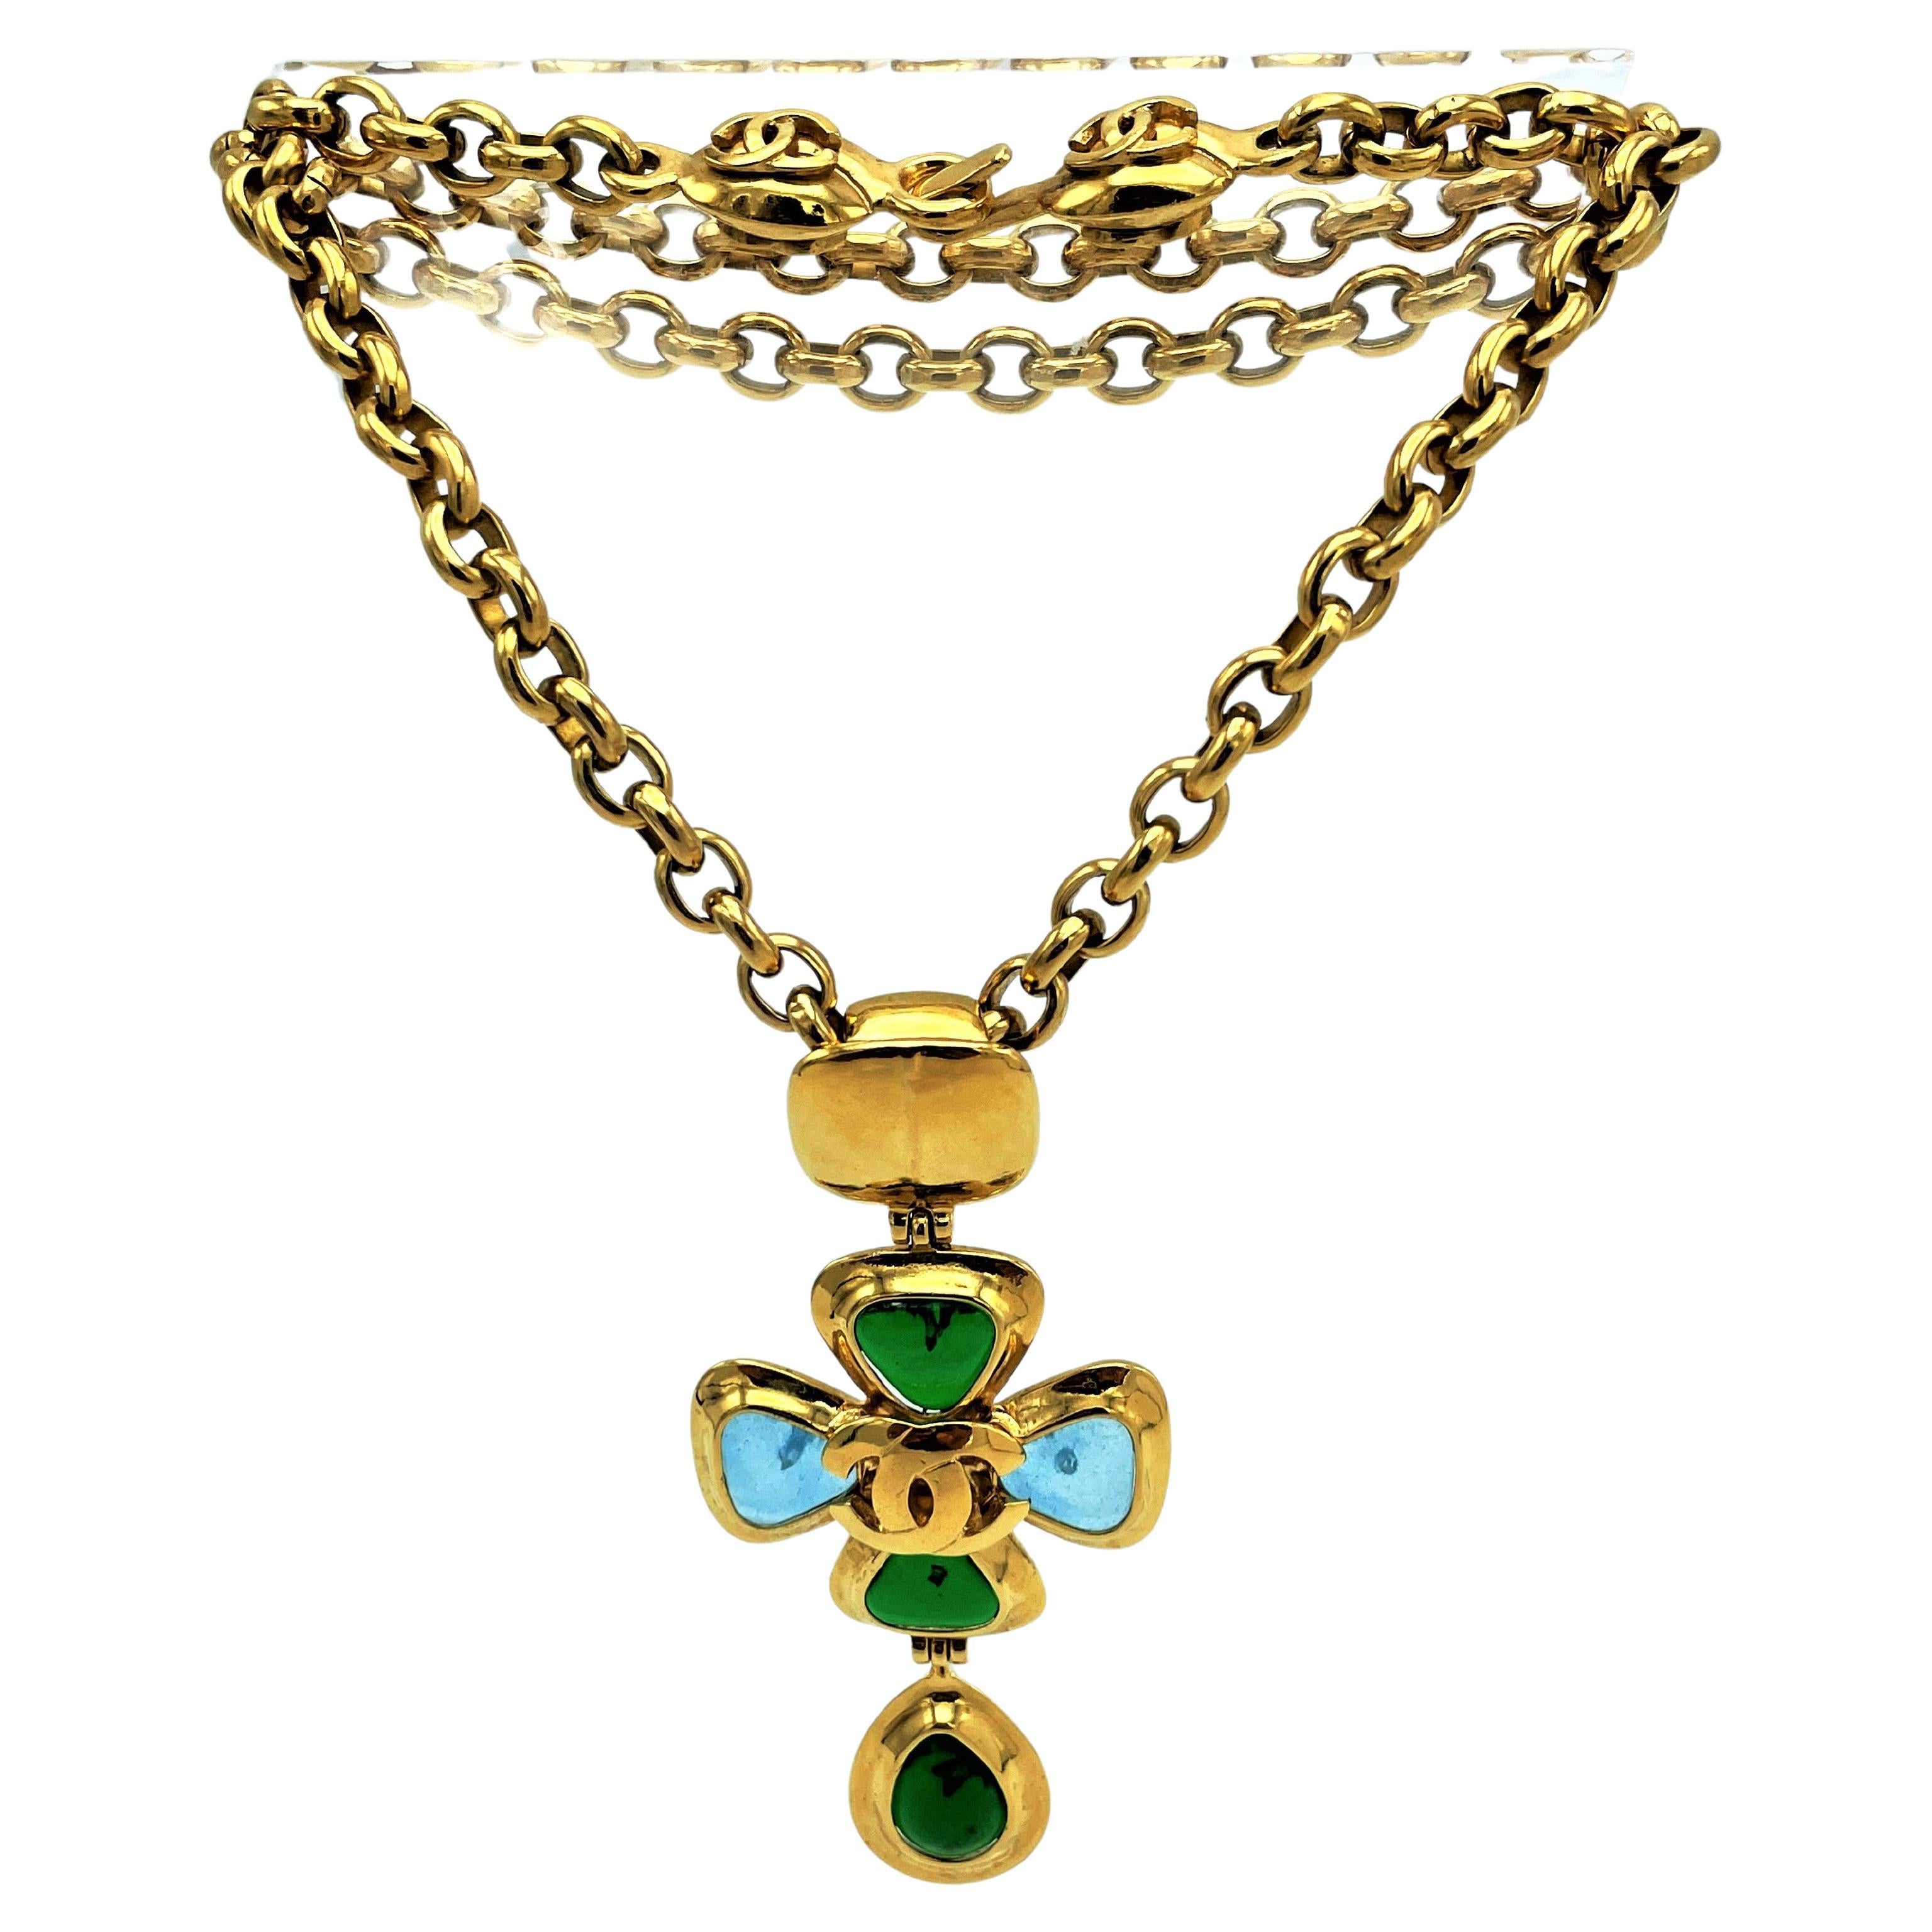 Vintage Chanel link chain with cross pendant filled with Gripoix glass, 1997 